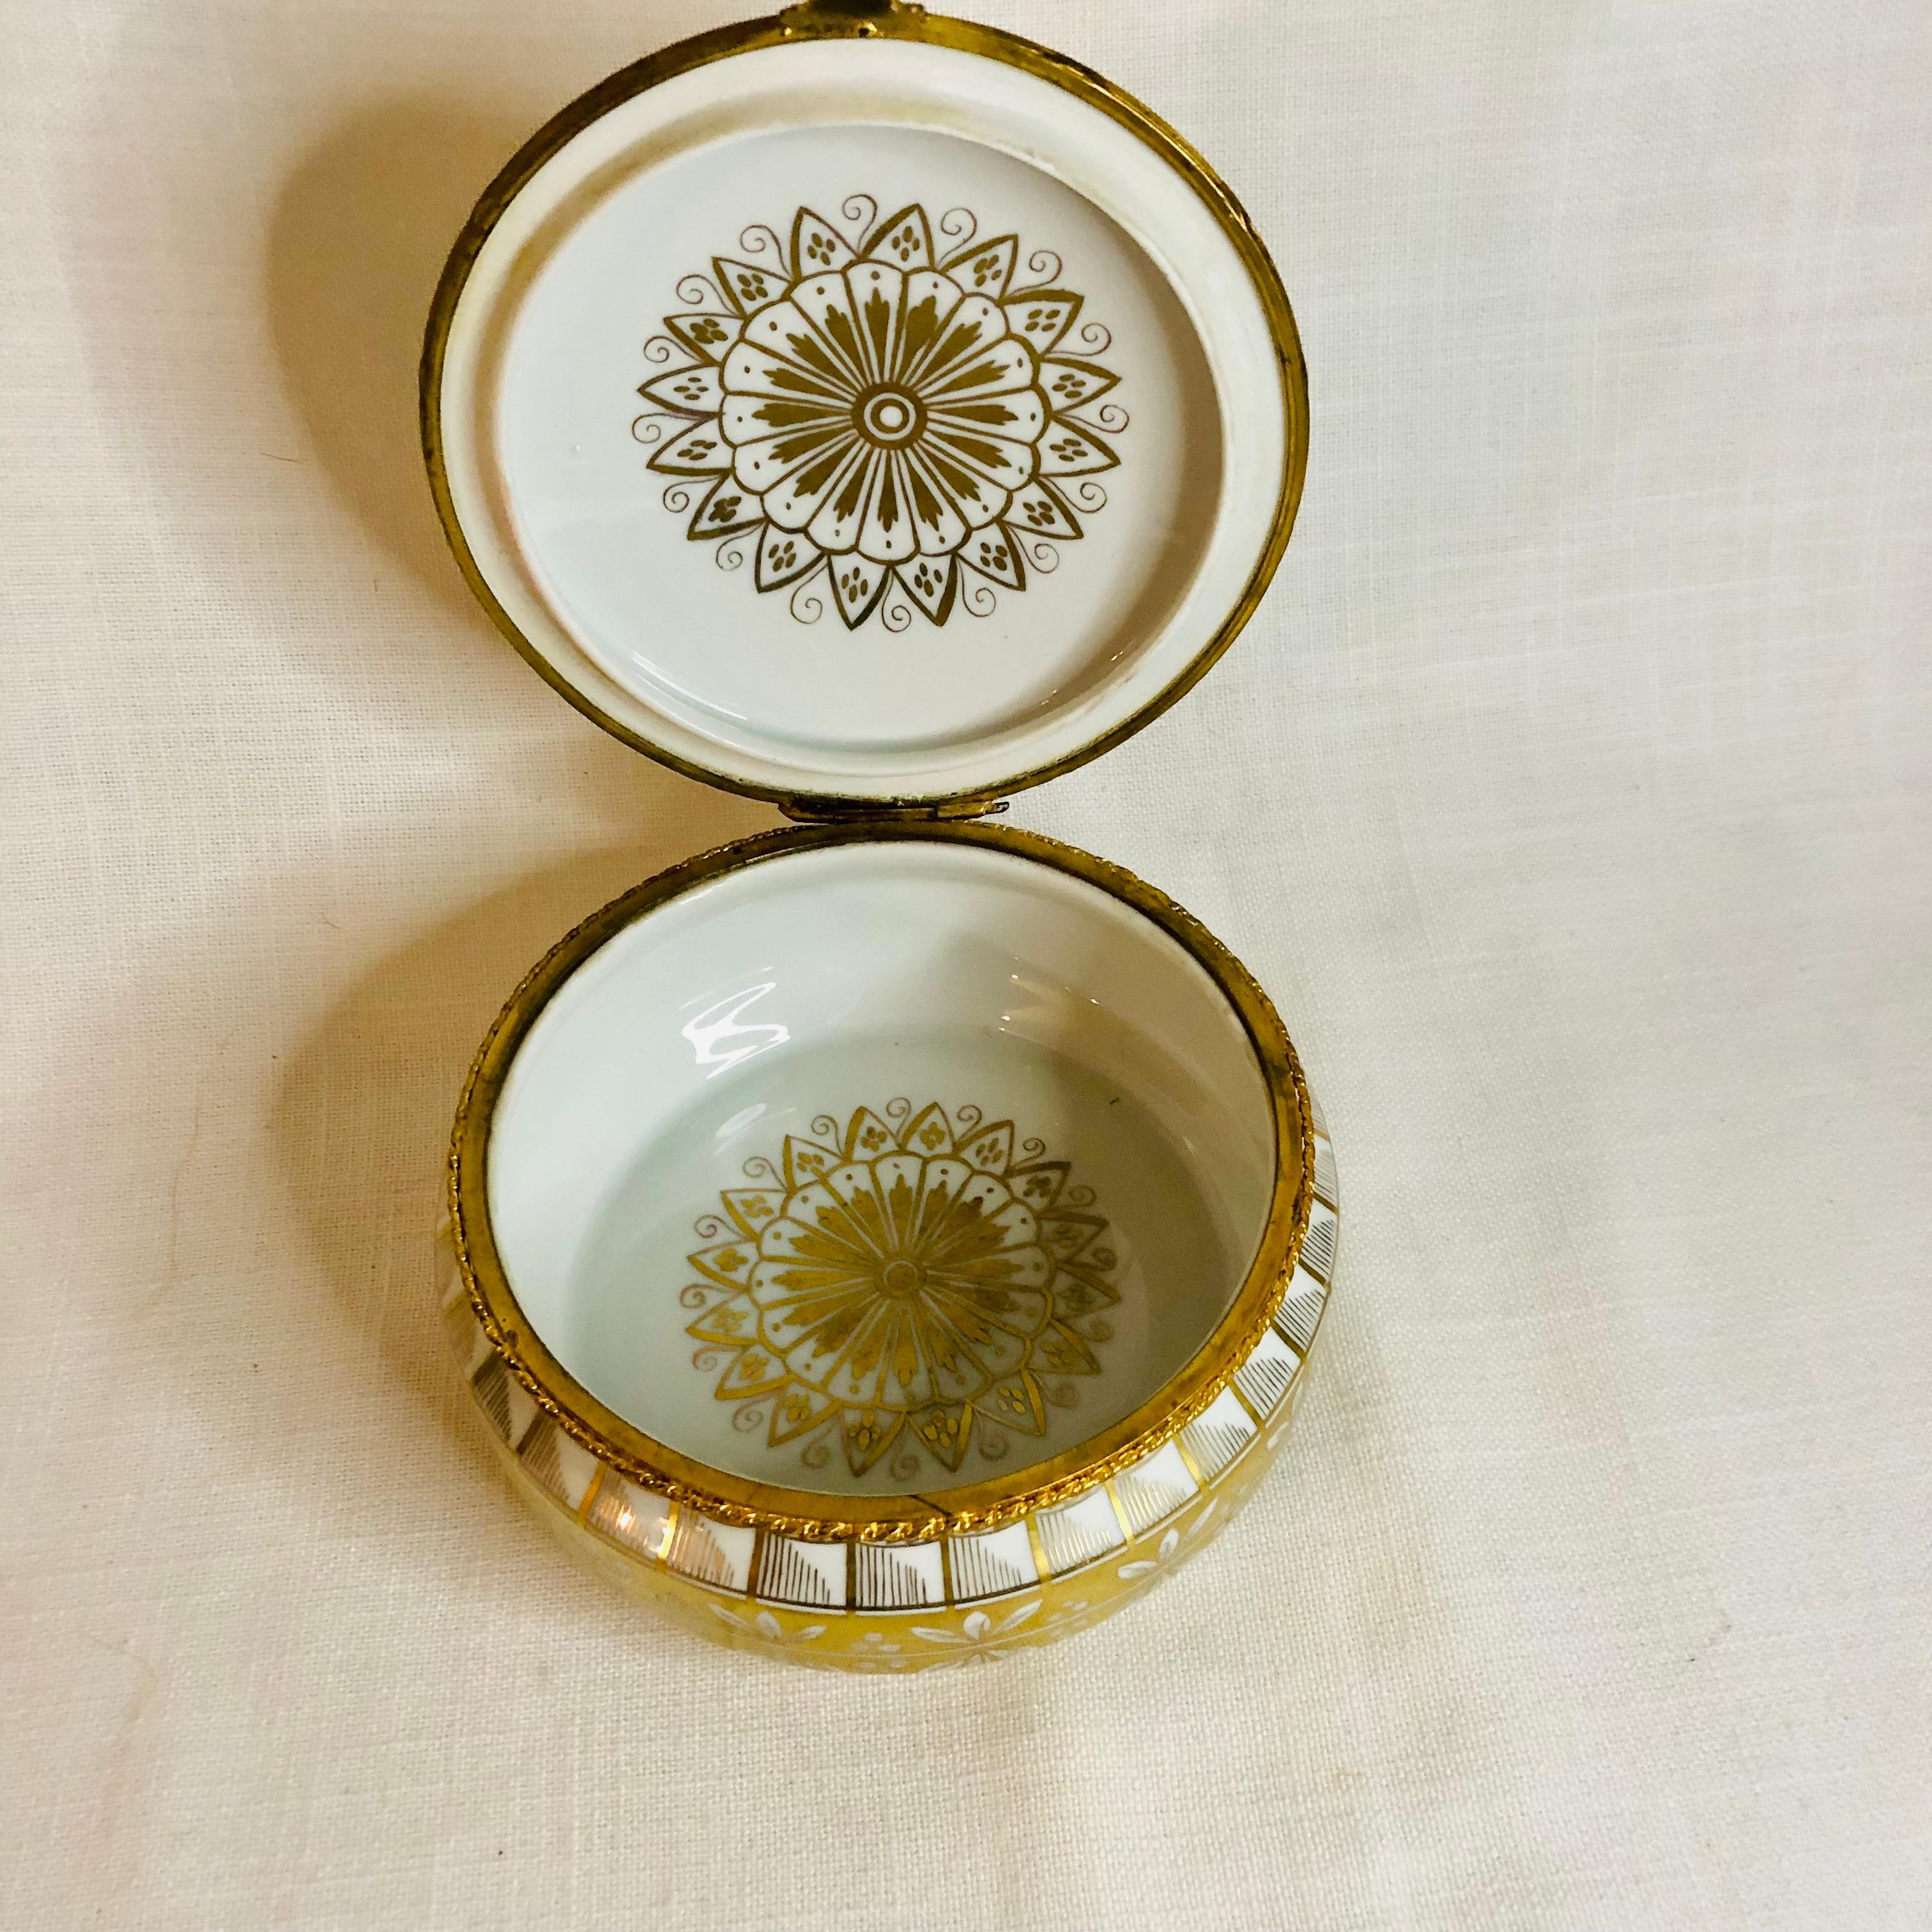 Le Tallec Porcelain Box with Gold Painted Decoration on a White Porcelain Ground 2